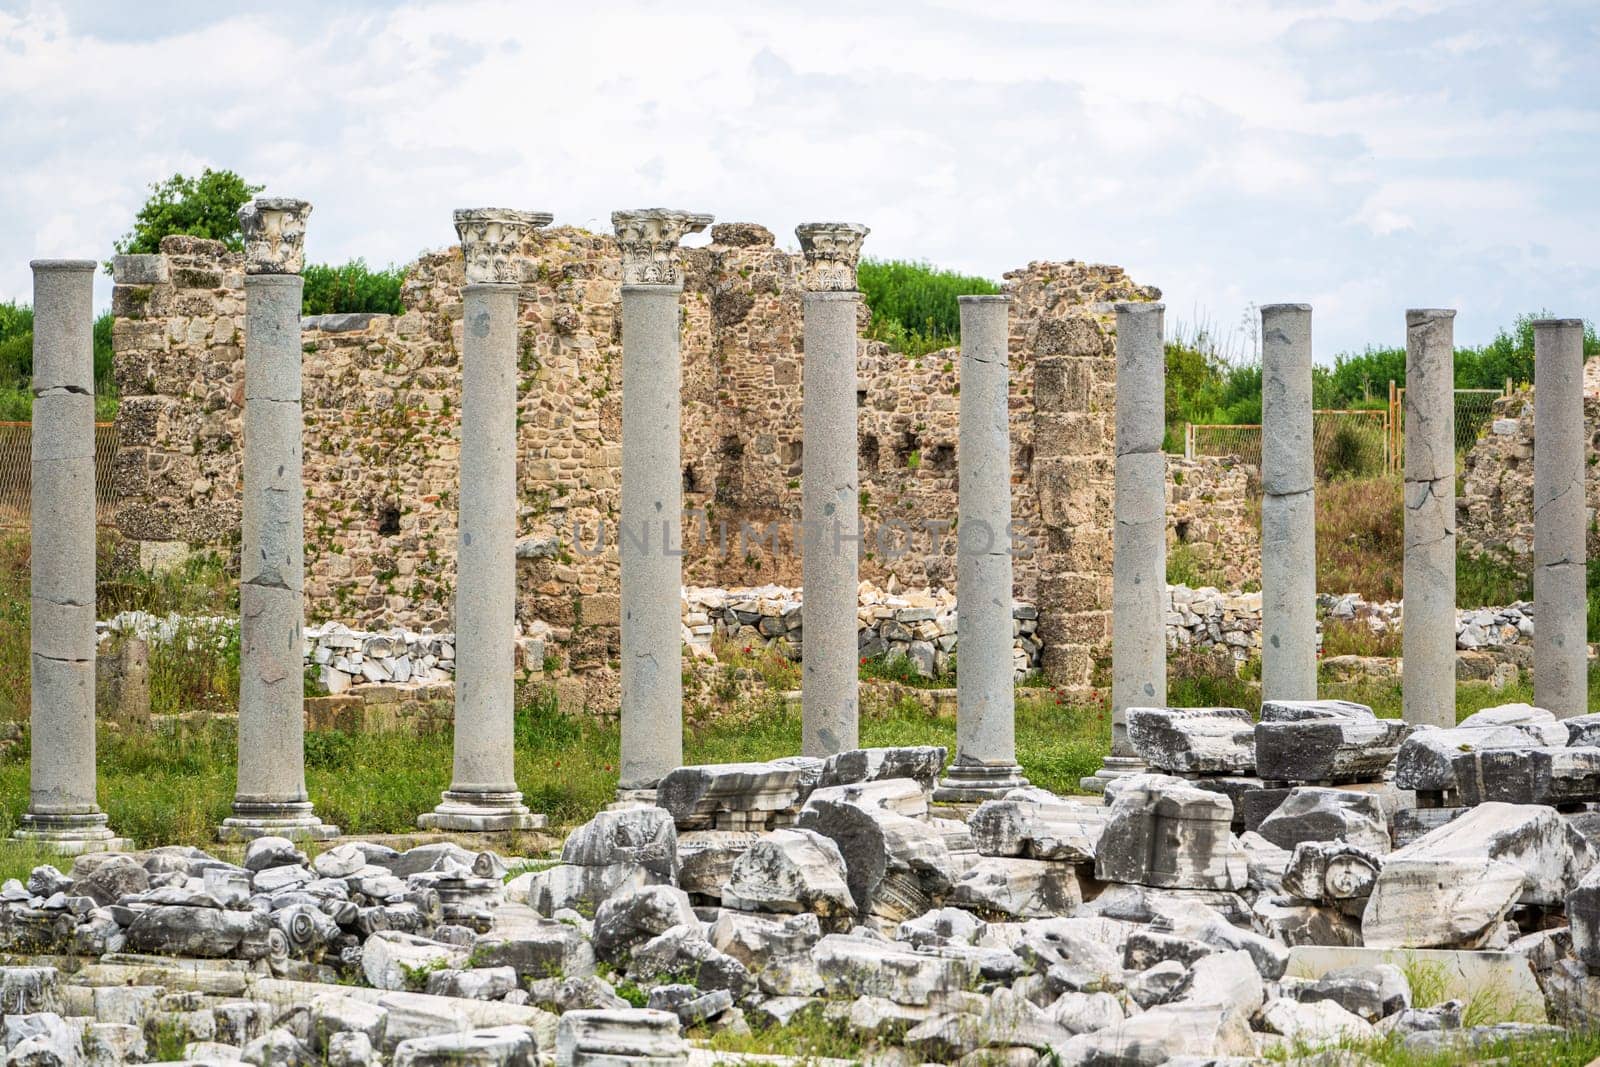 Restored ancient architectural ruins and columns of the ancient city of Side by Sonat